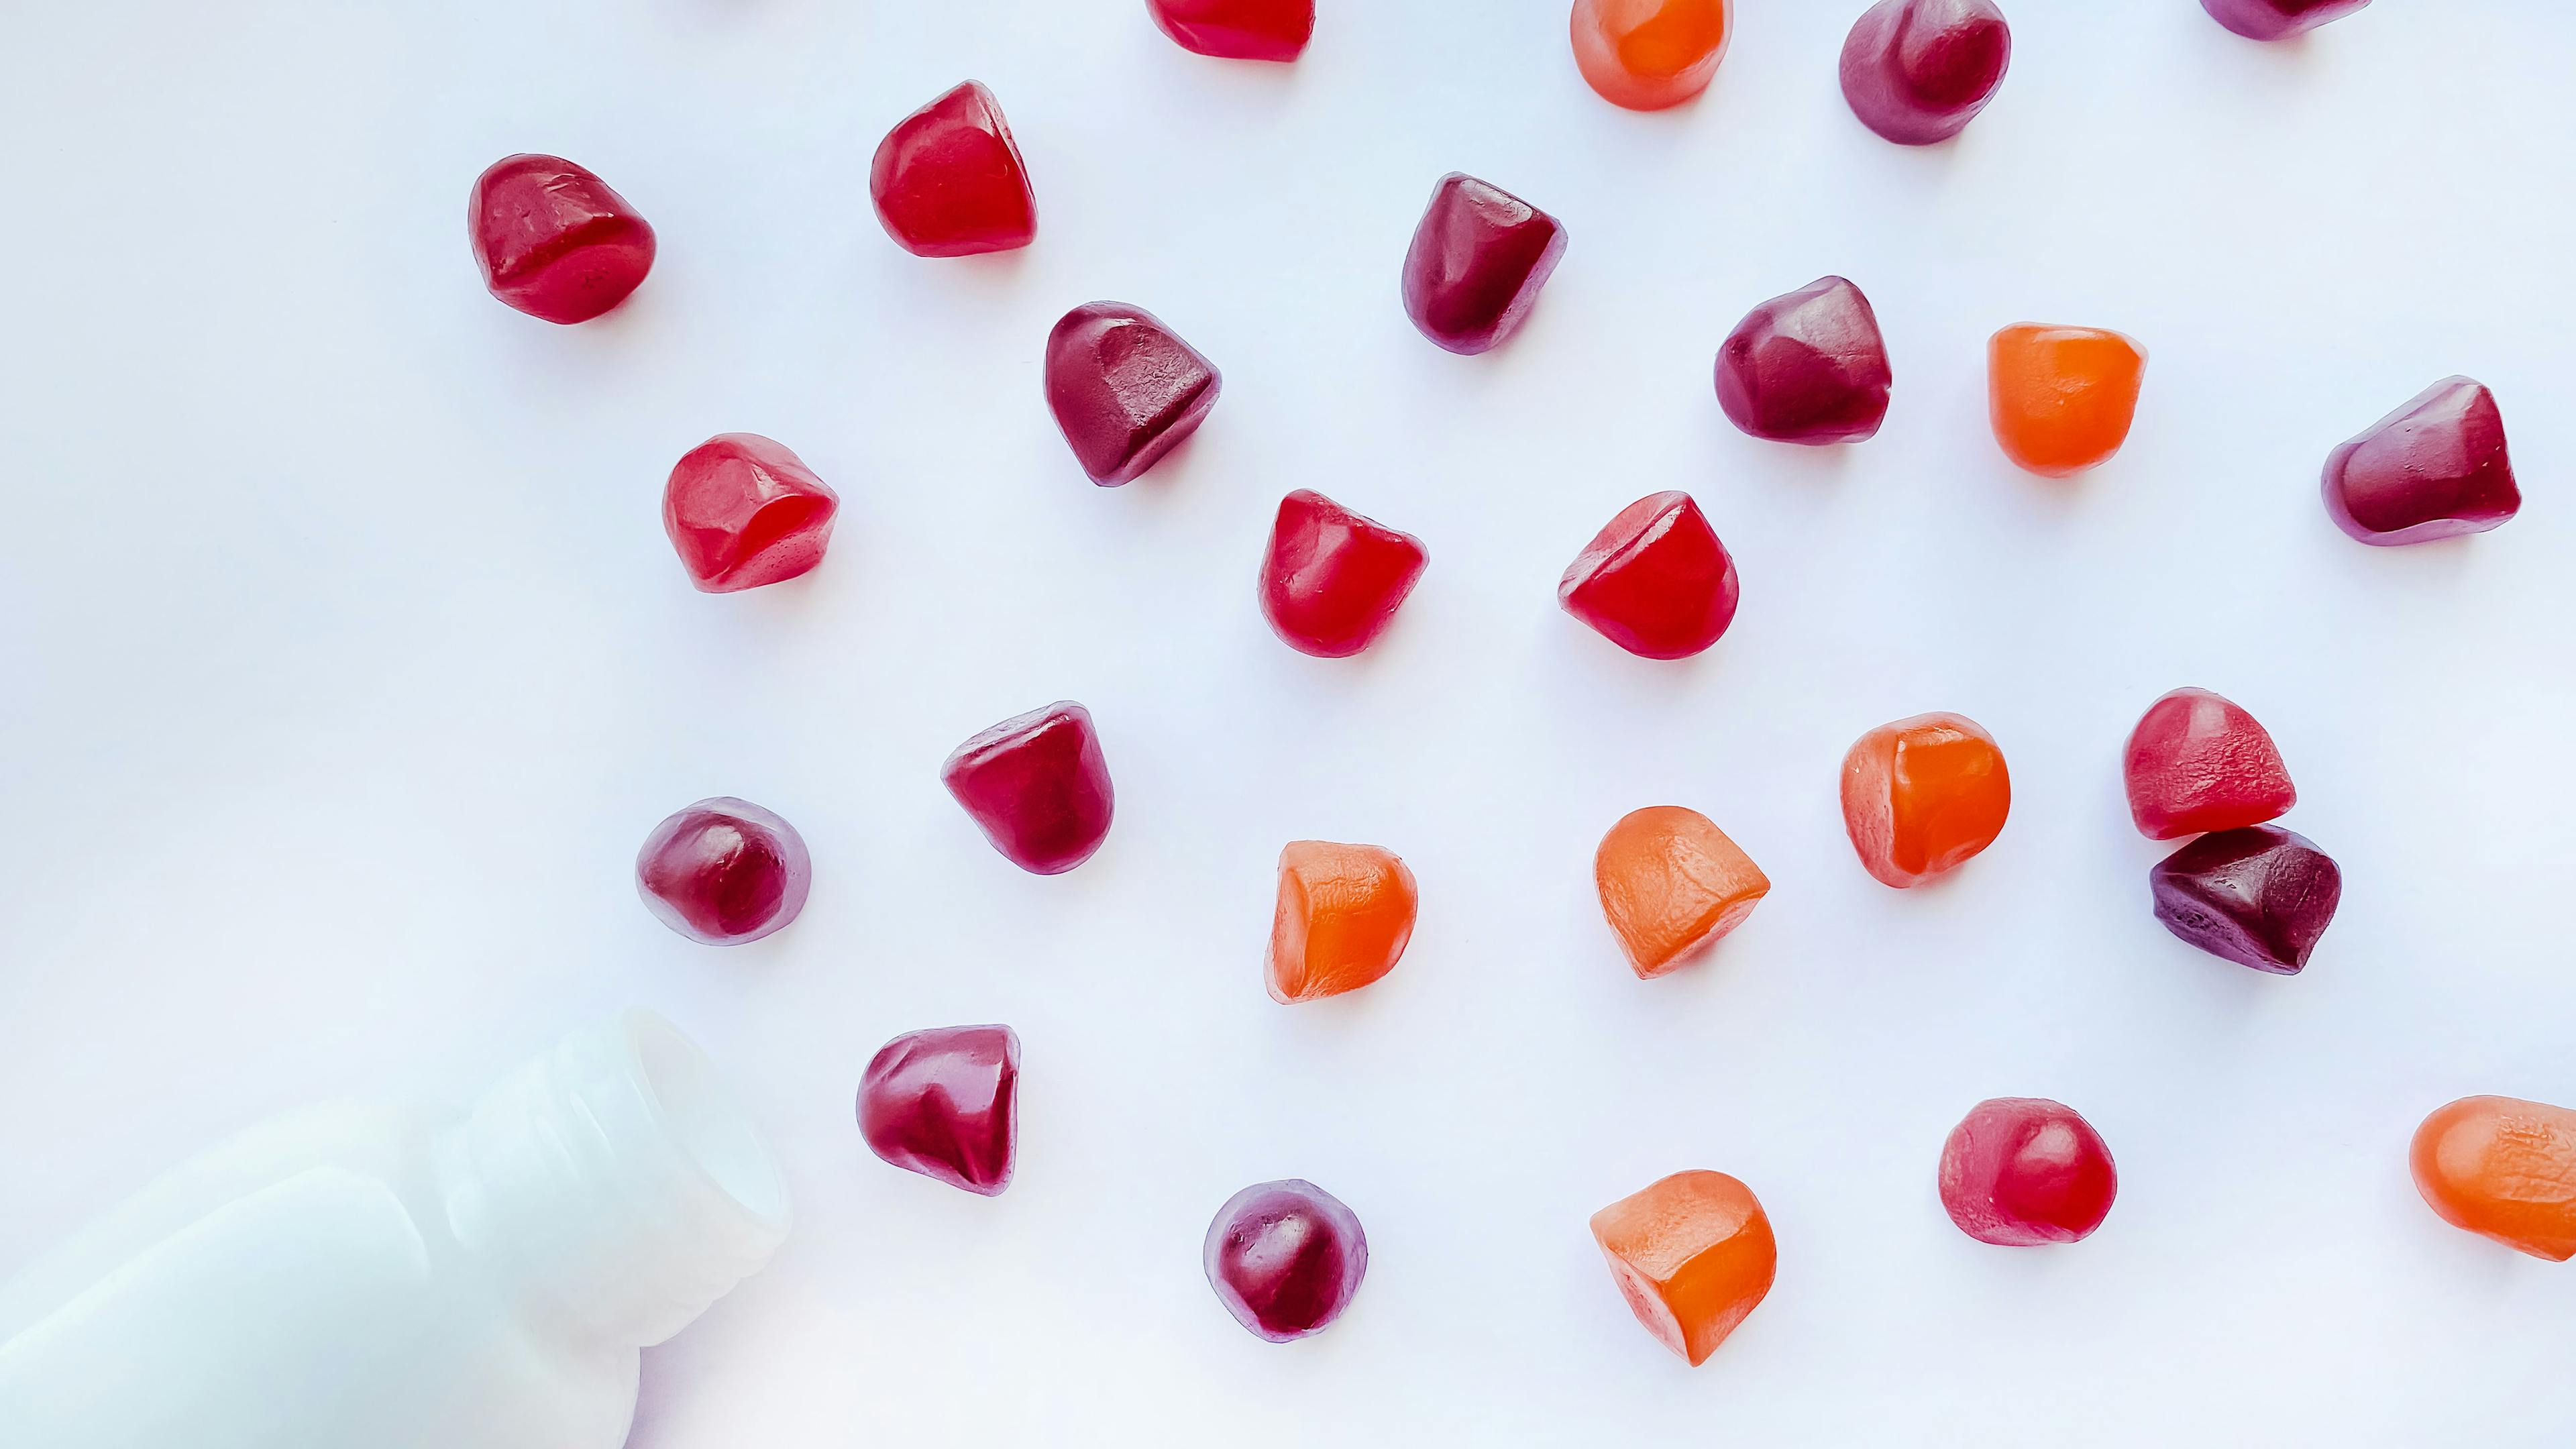 gummies scattered on white background